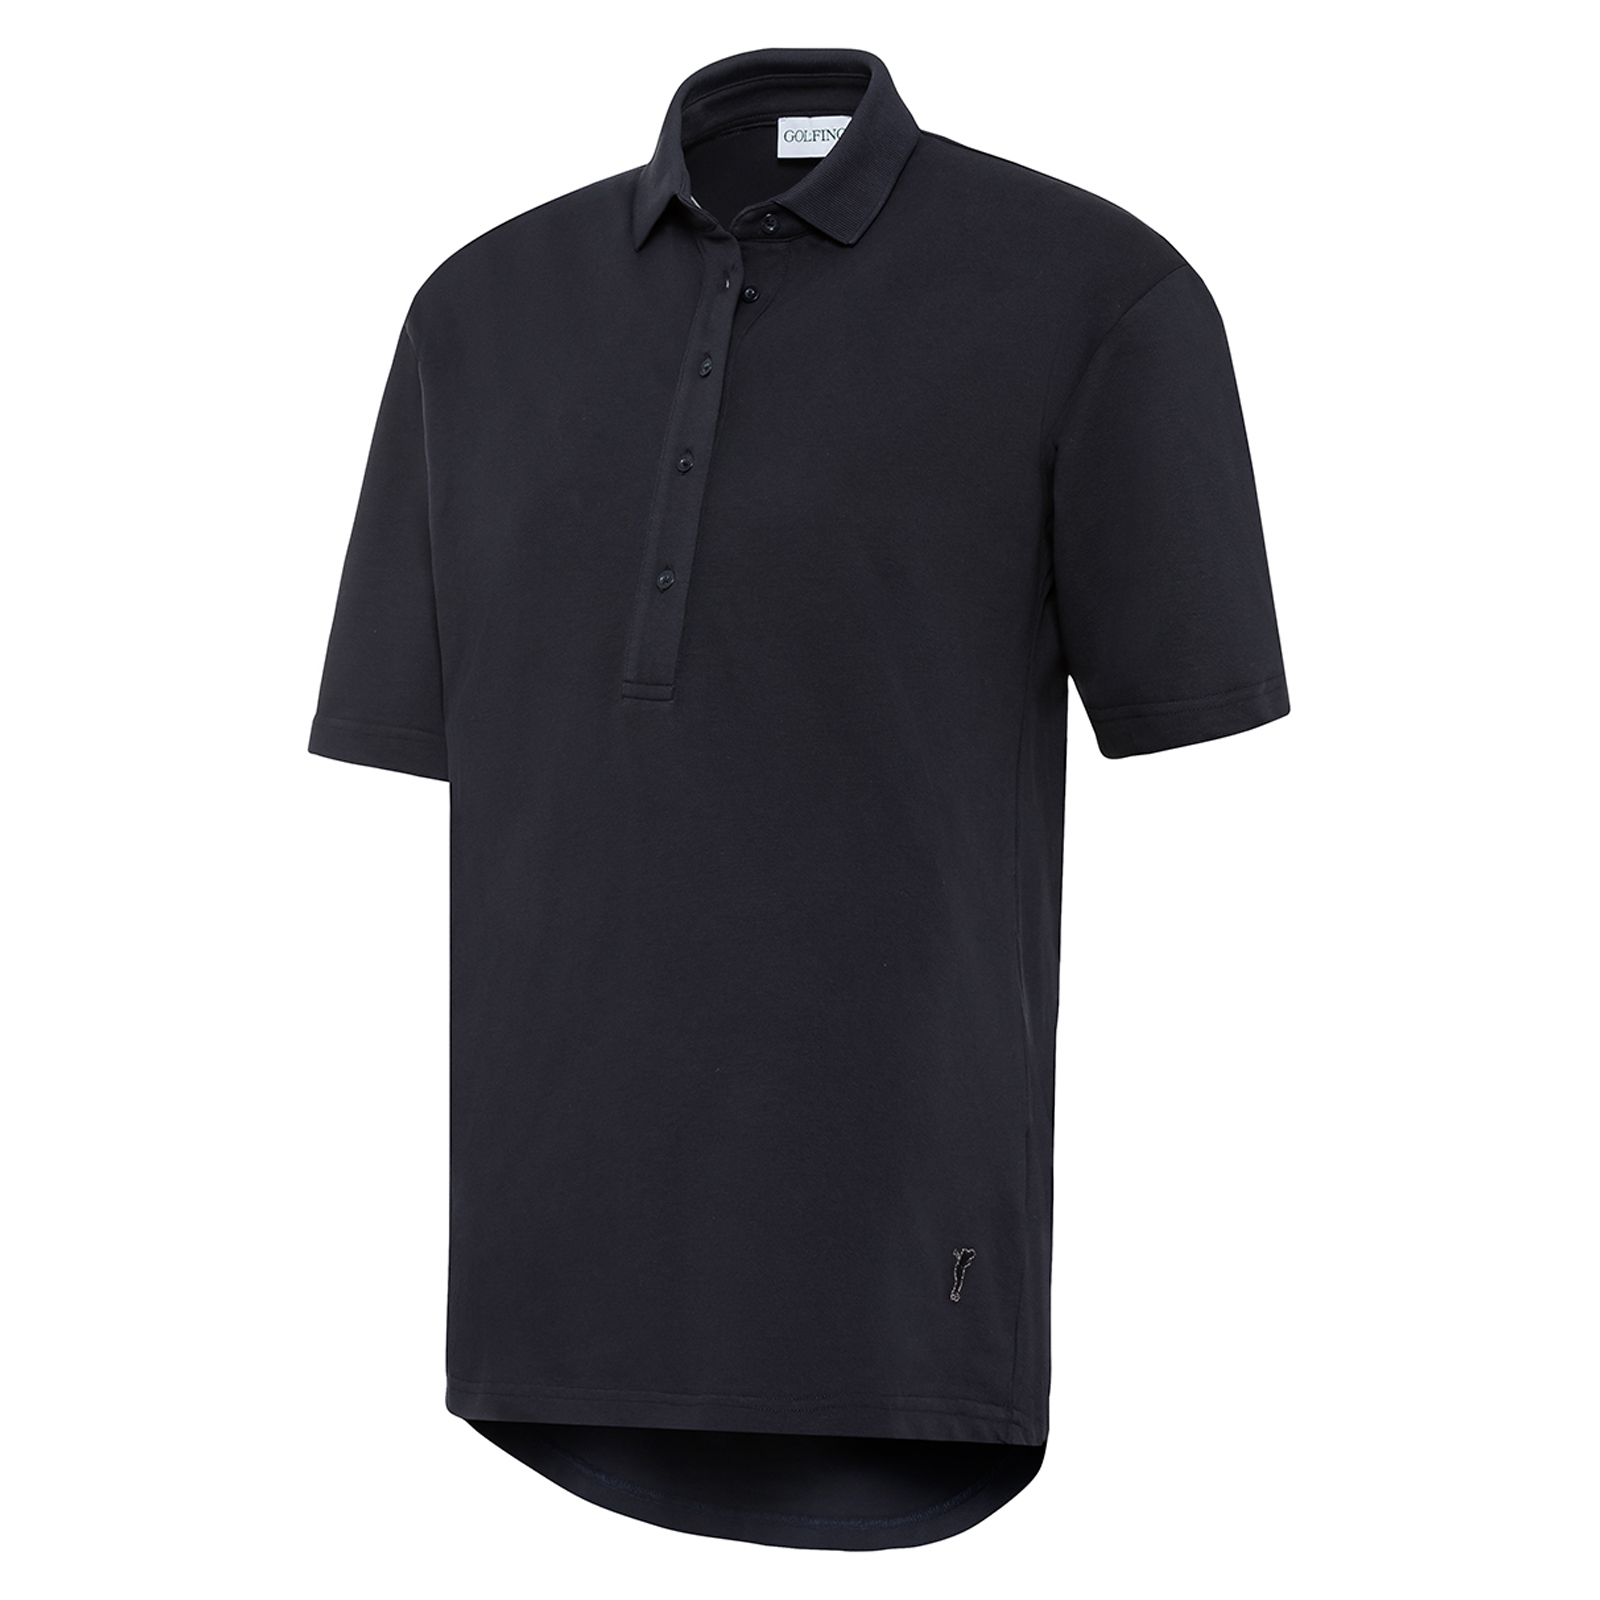 Ladies' short-sleeved polo shirt with extra stretch comfort, made from a cotton blend